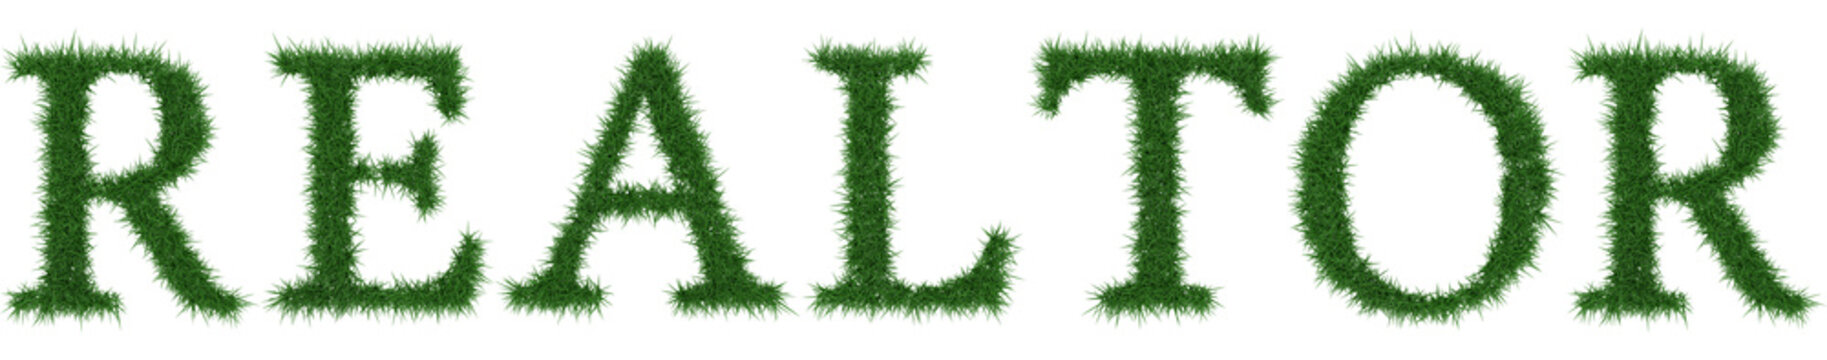 Realtor - 3D rendering fresh Grass letters isolated on whhite background.